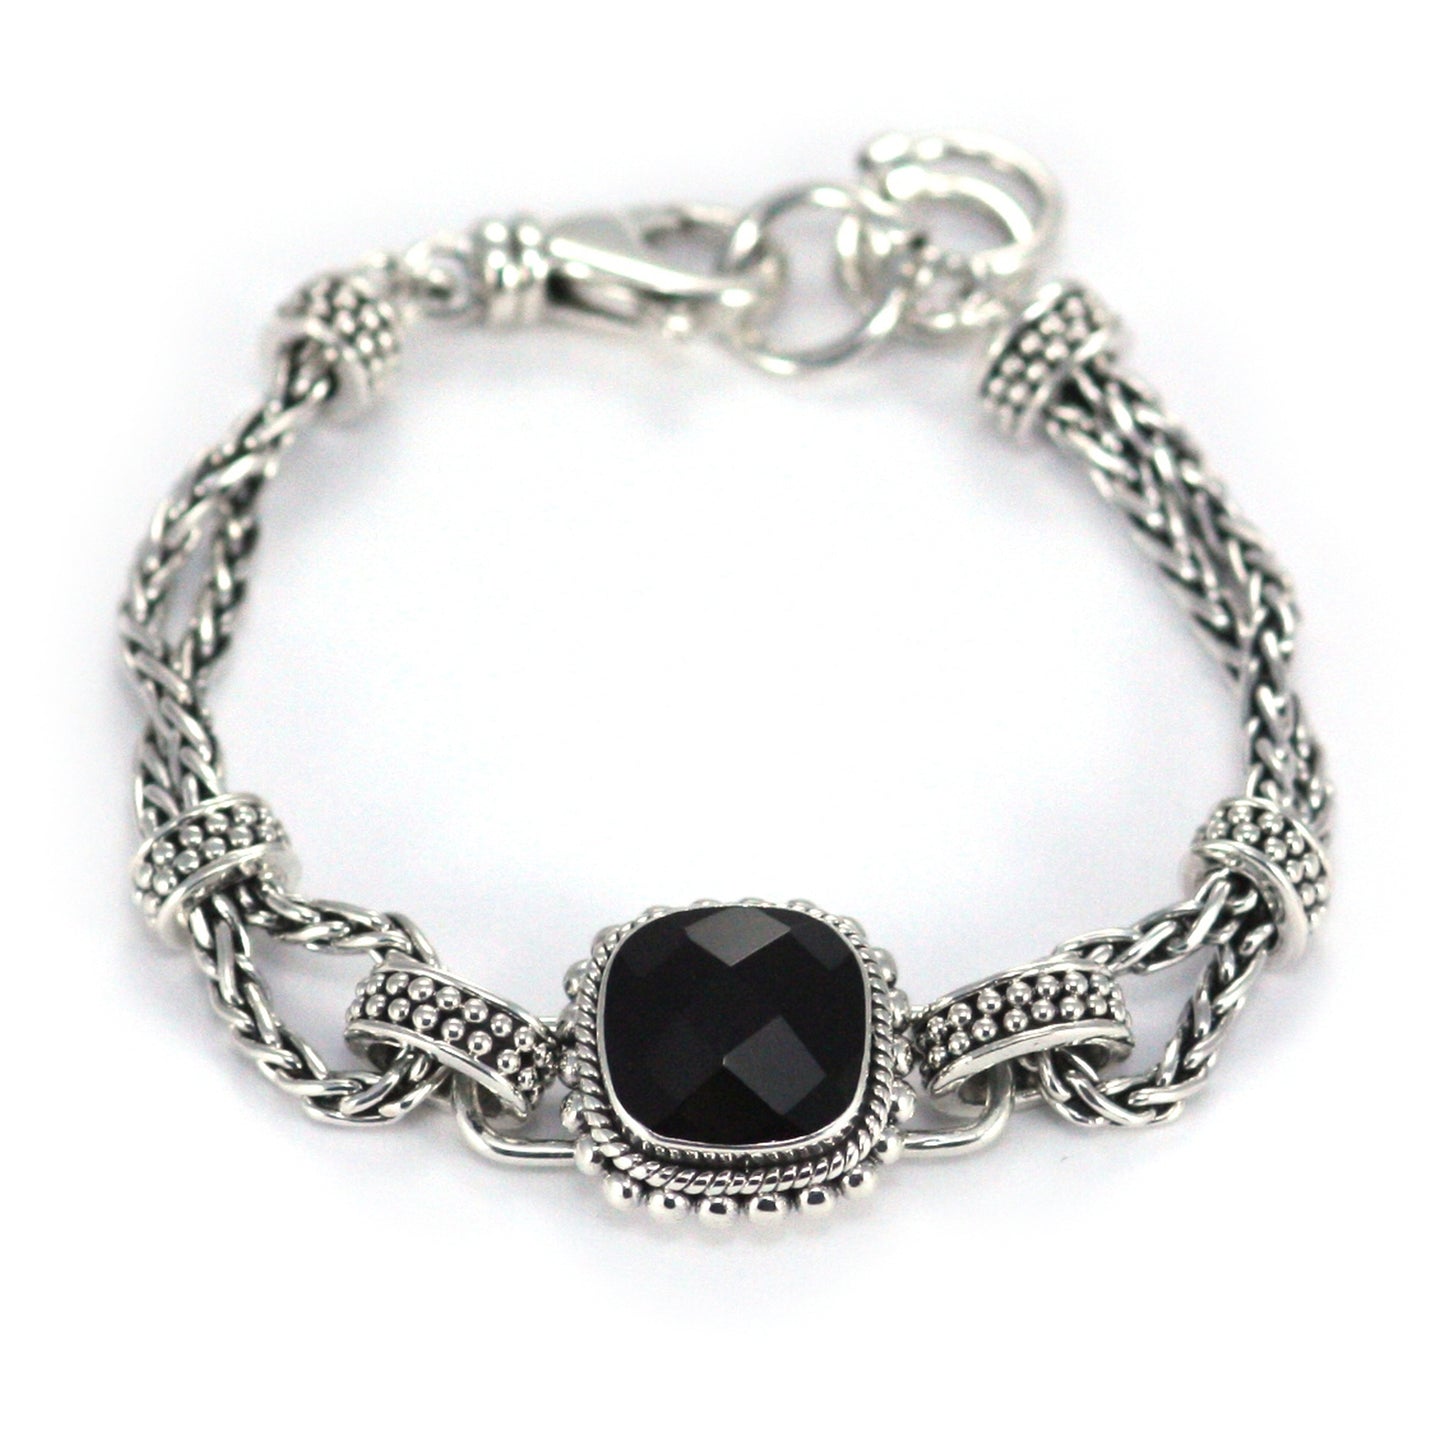 Silver bracelet made of wheat chain elements and a centered station with a single faceted black onyx stone.